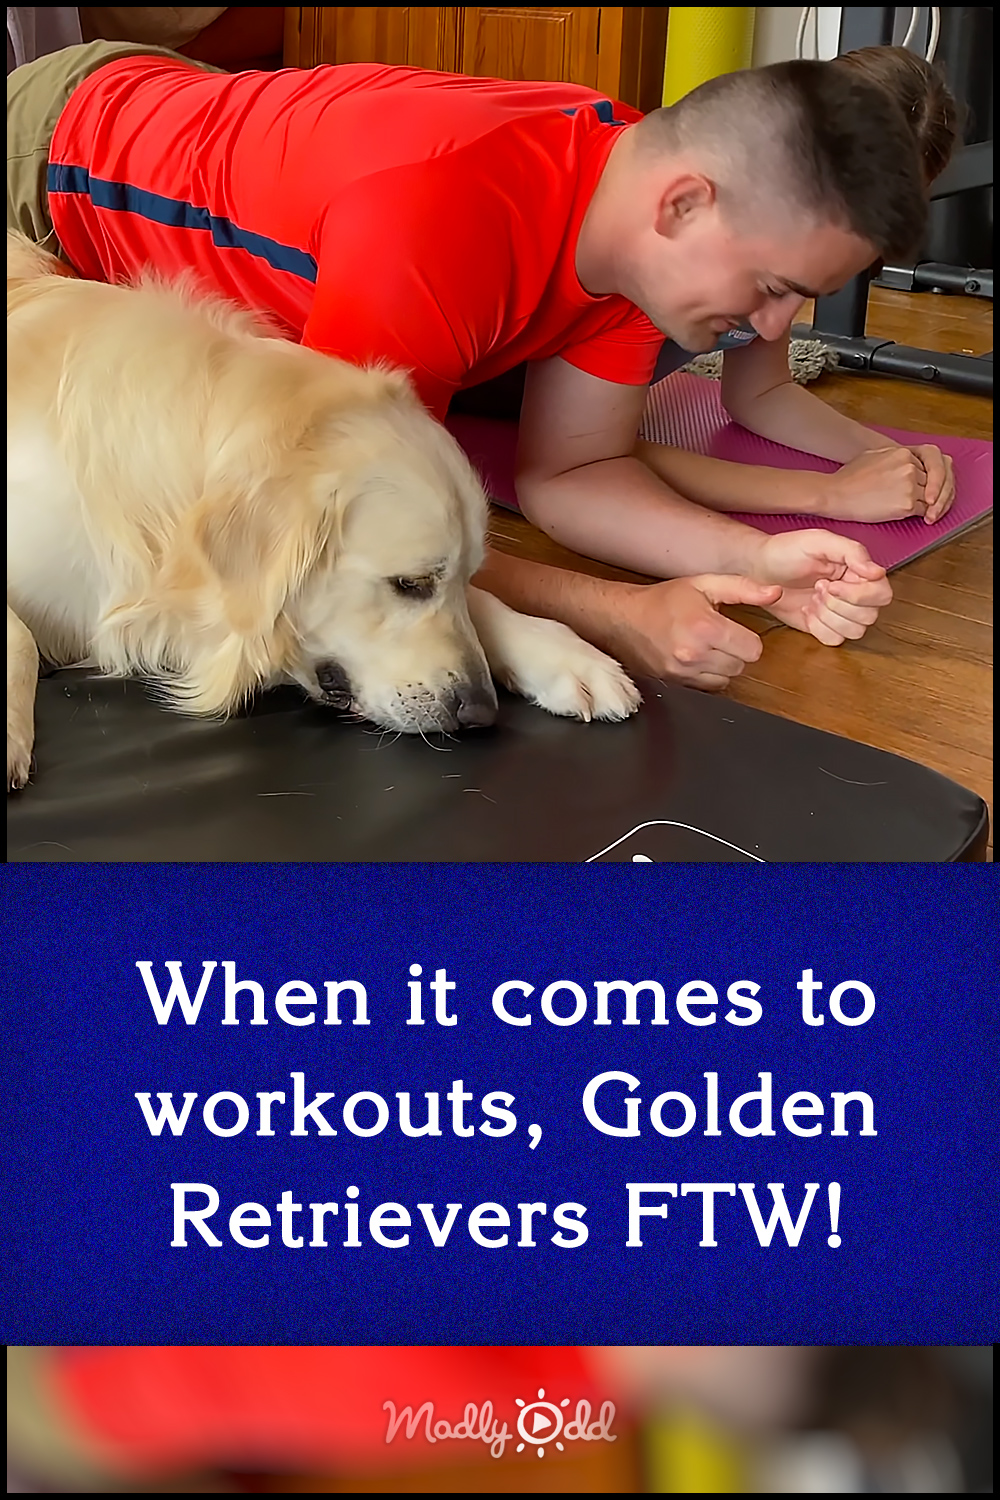 When it comes to workouts, Golden Retrievers FTW!